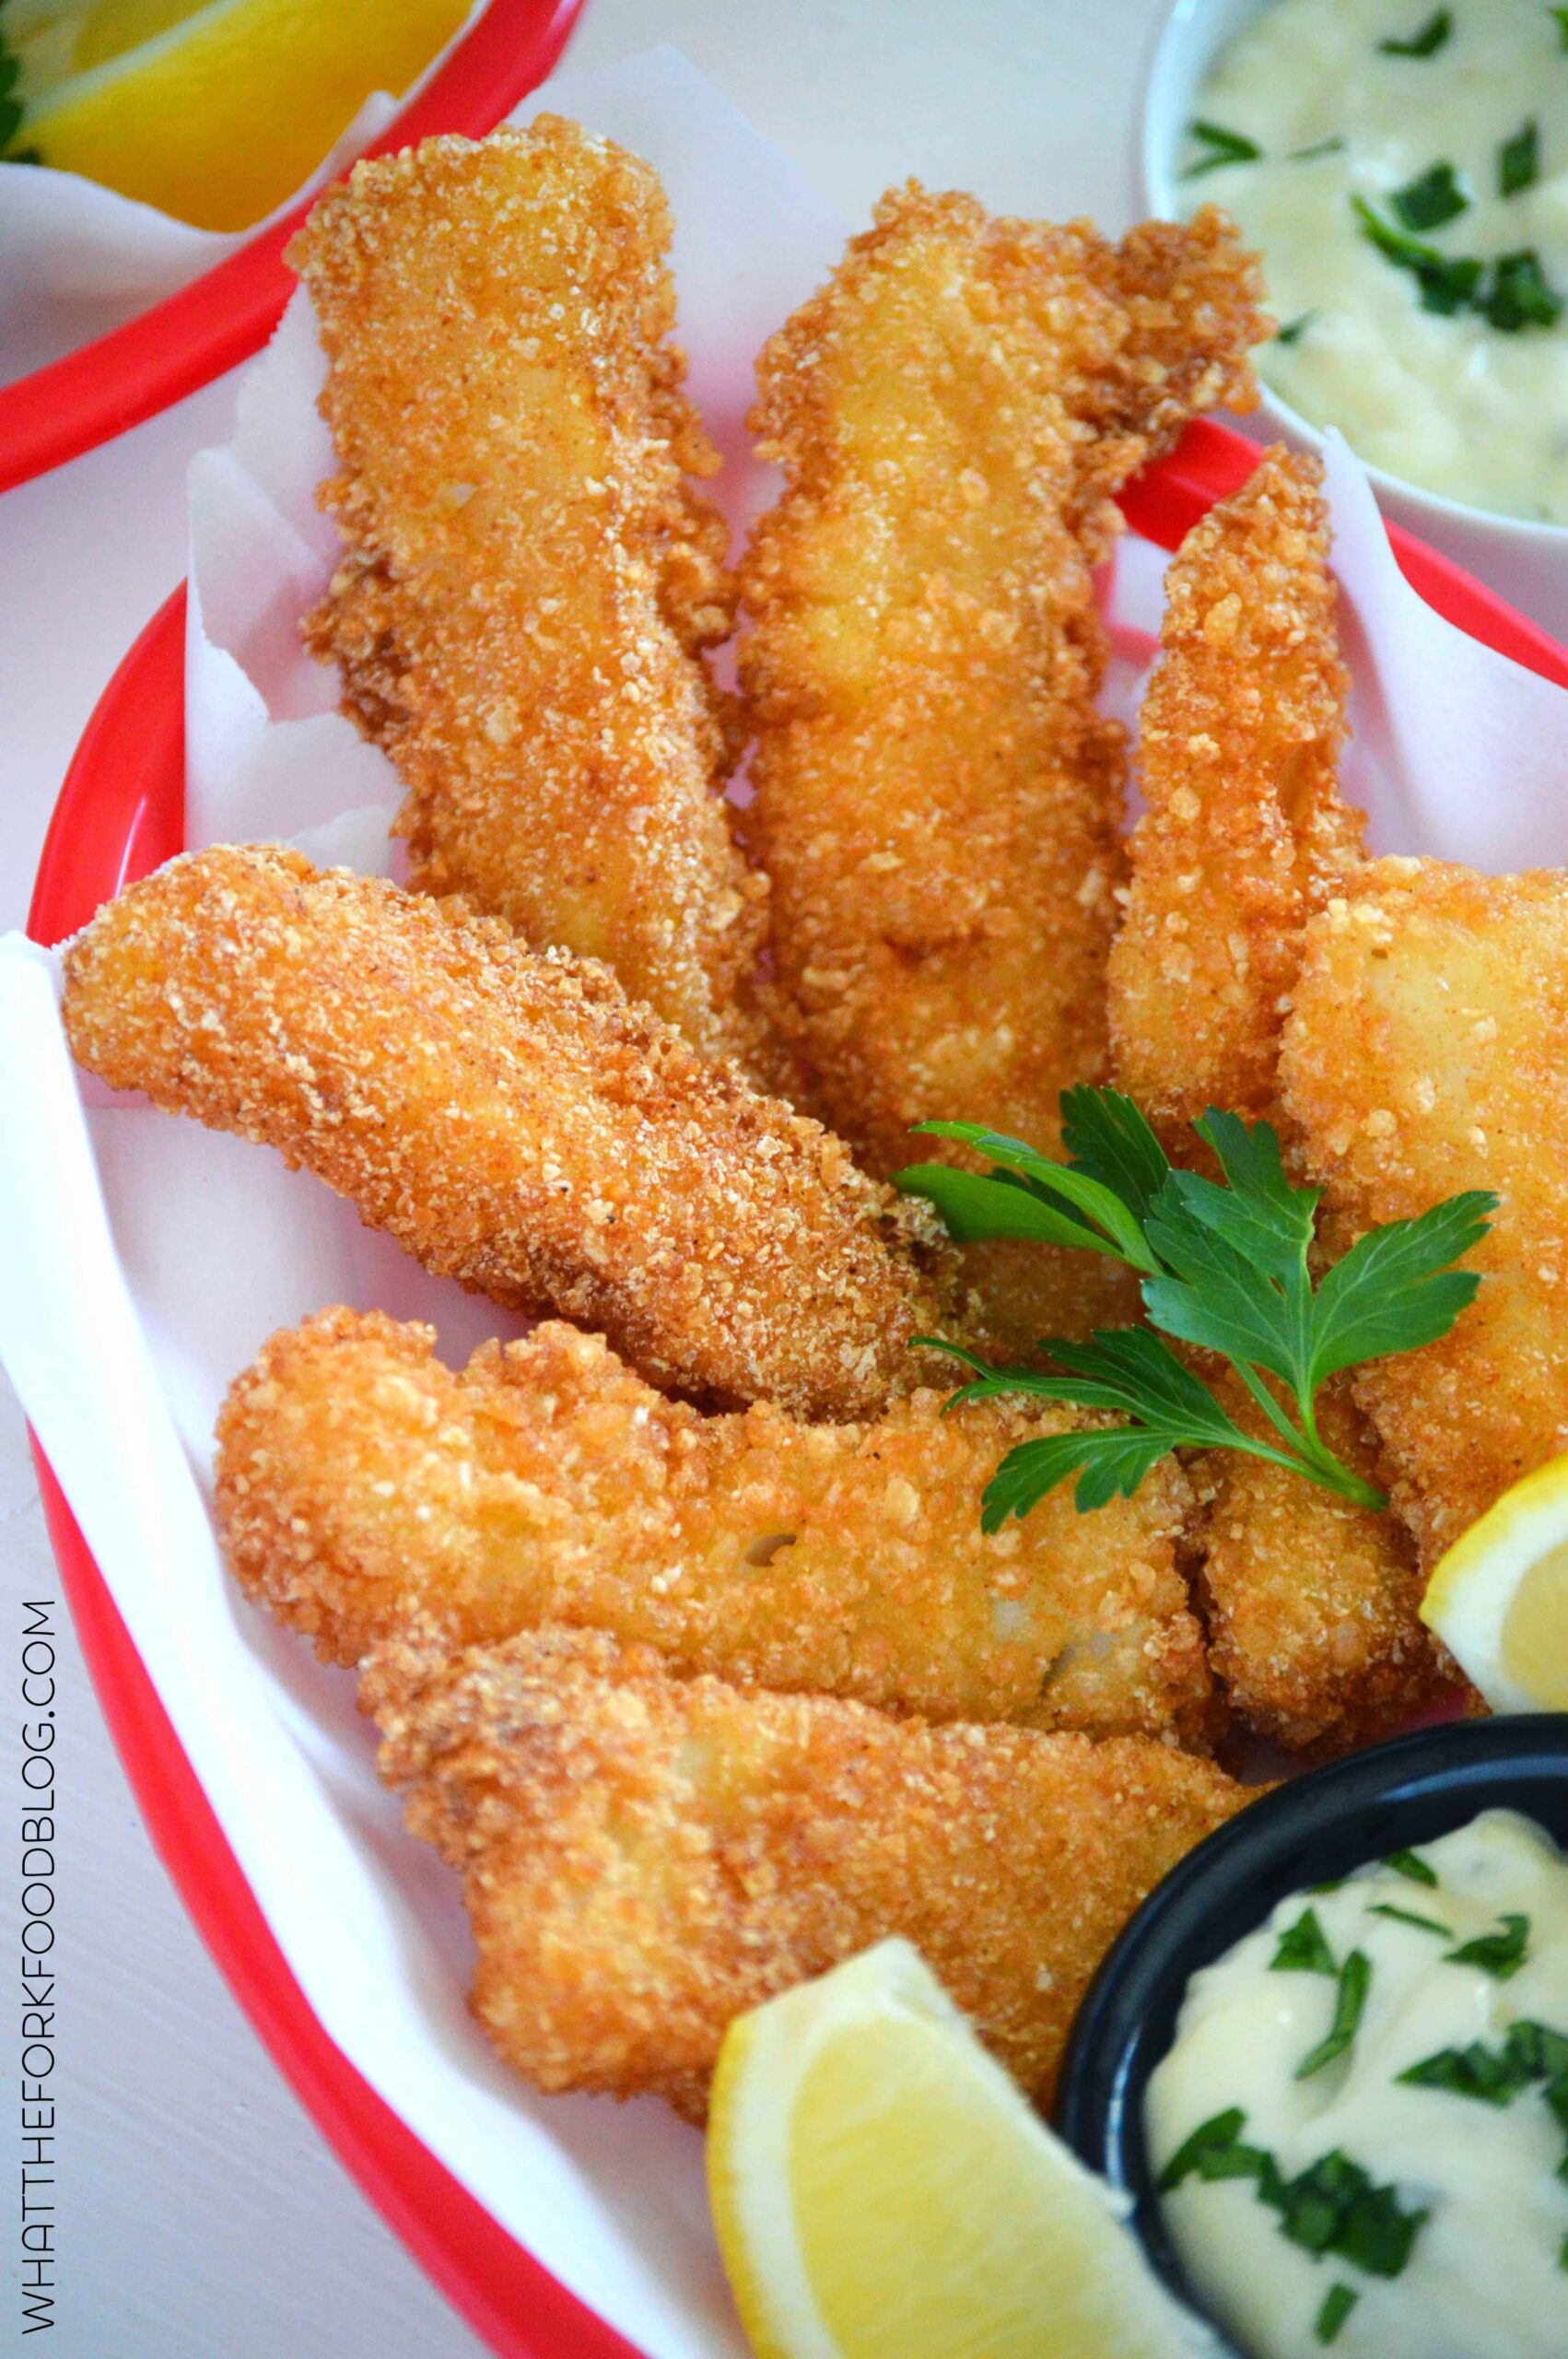  Gluten-free fish fry, because life is too short to miss out on Friday fish fries.